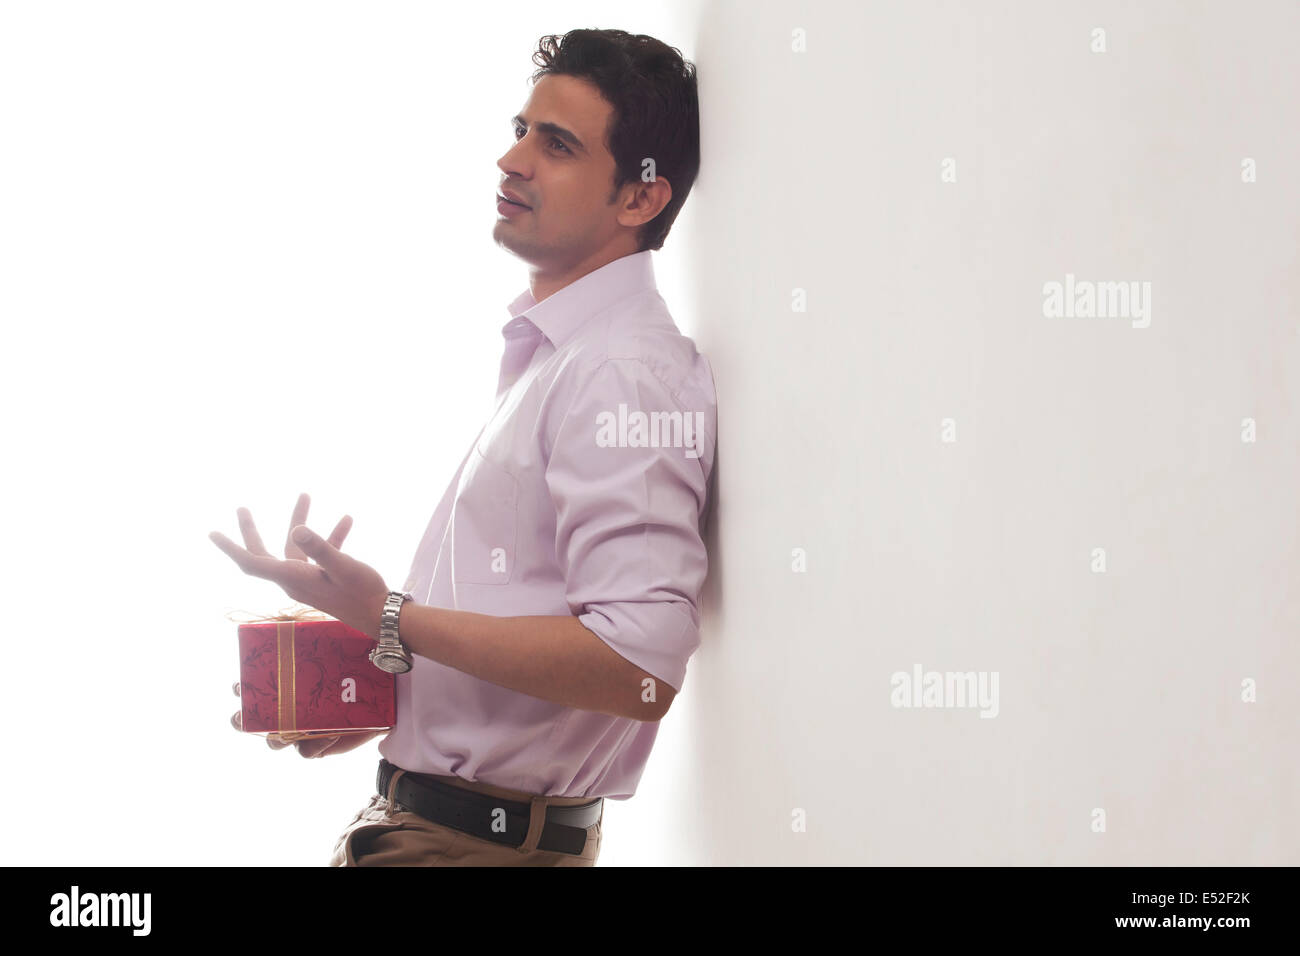 Man with a gift waiting for his date Stock Photo